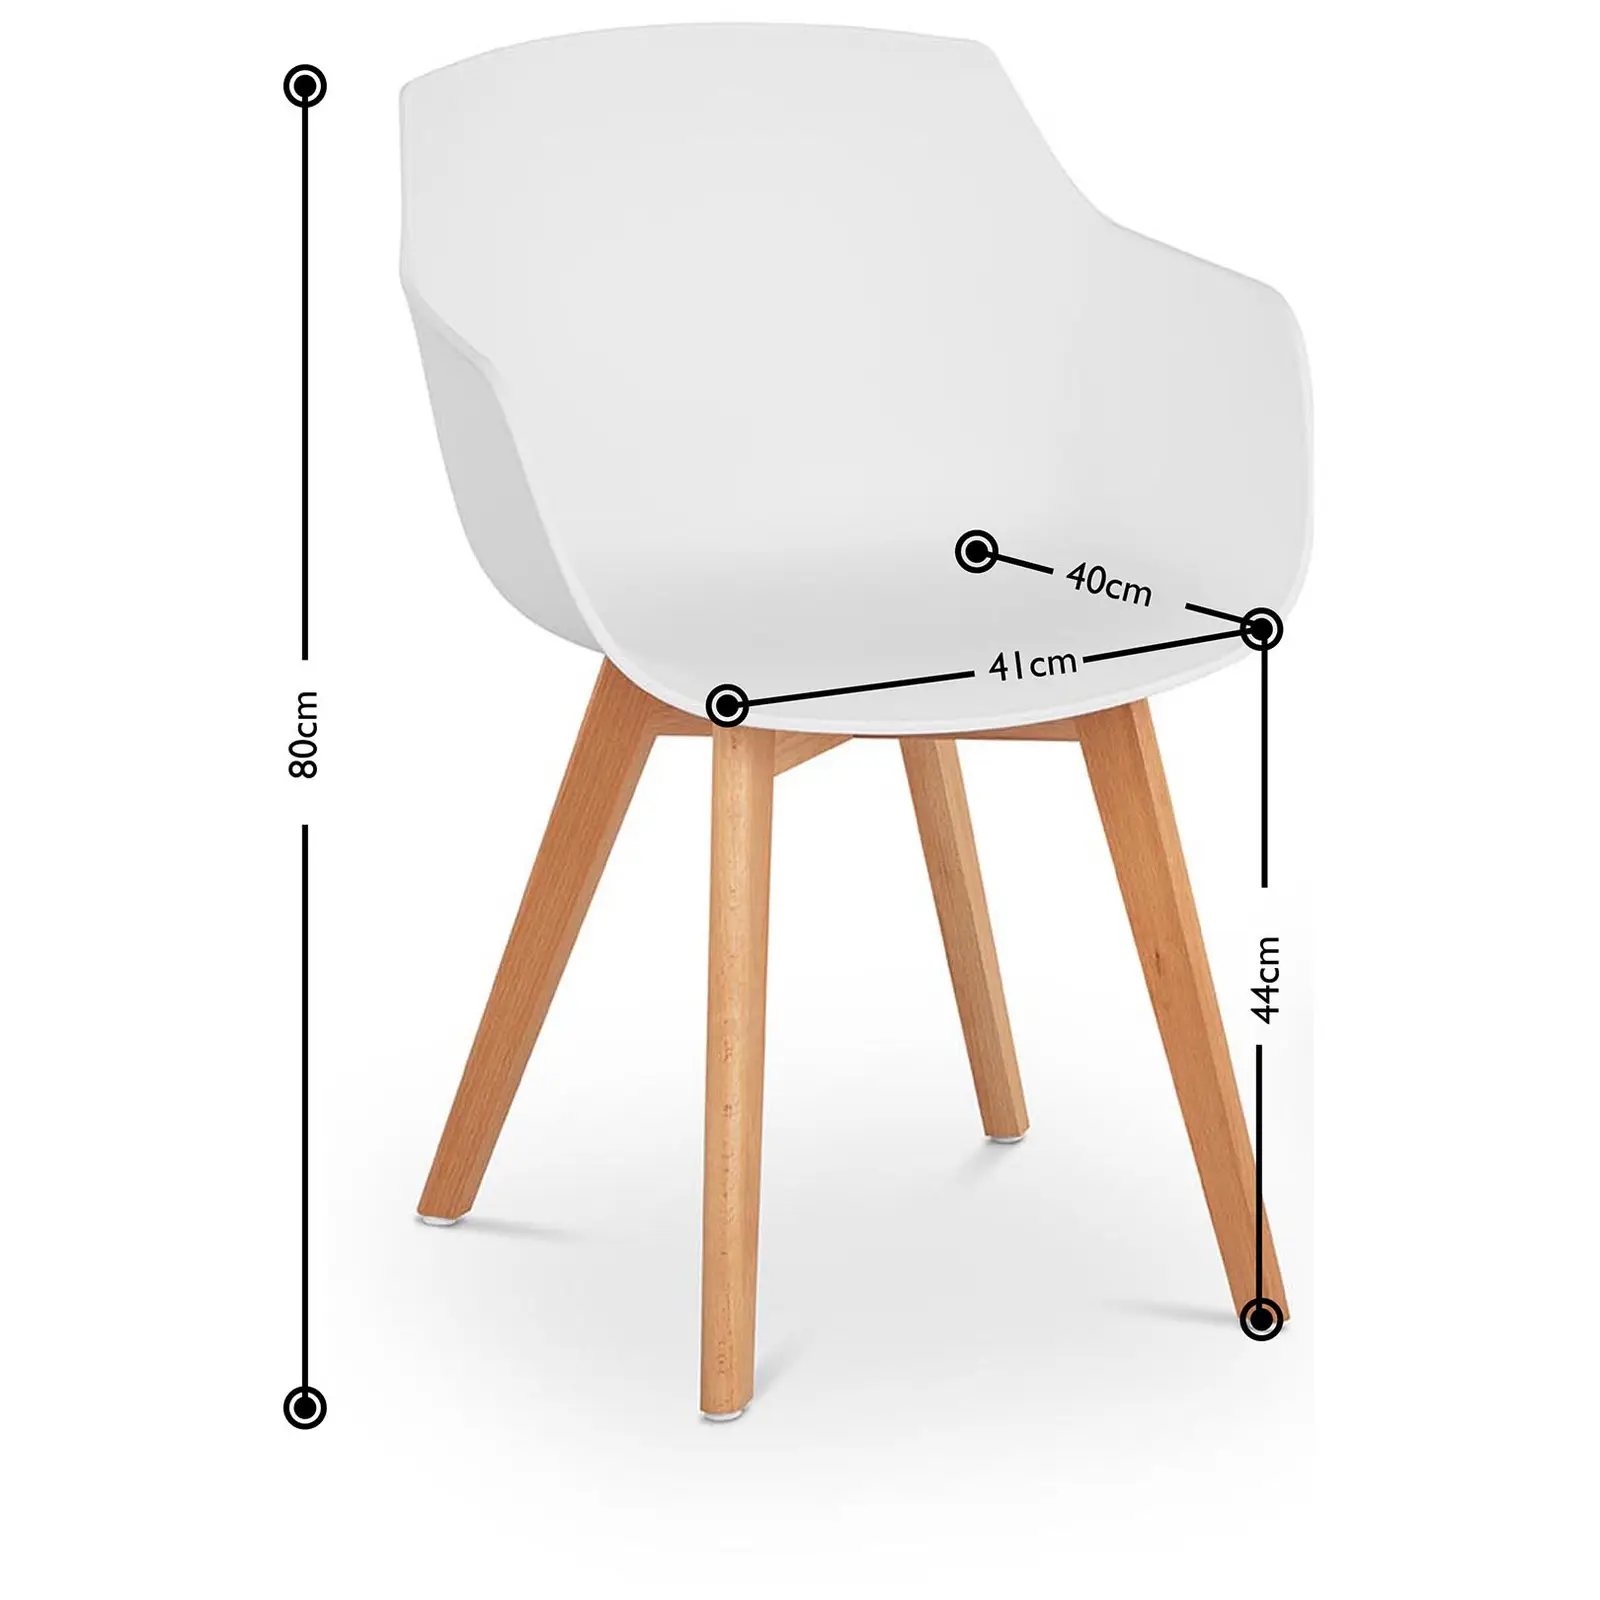 Factory second Chair - set of 2 - up to 150 kg - seat 41 x 40 cm - white